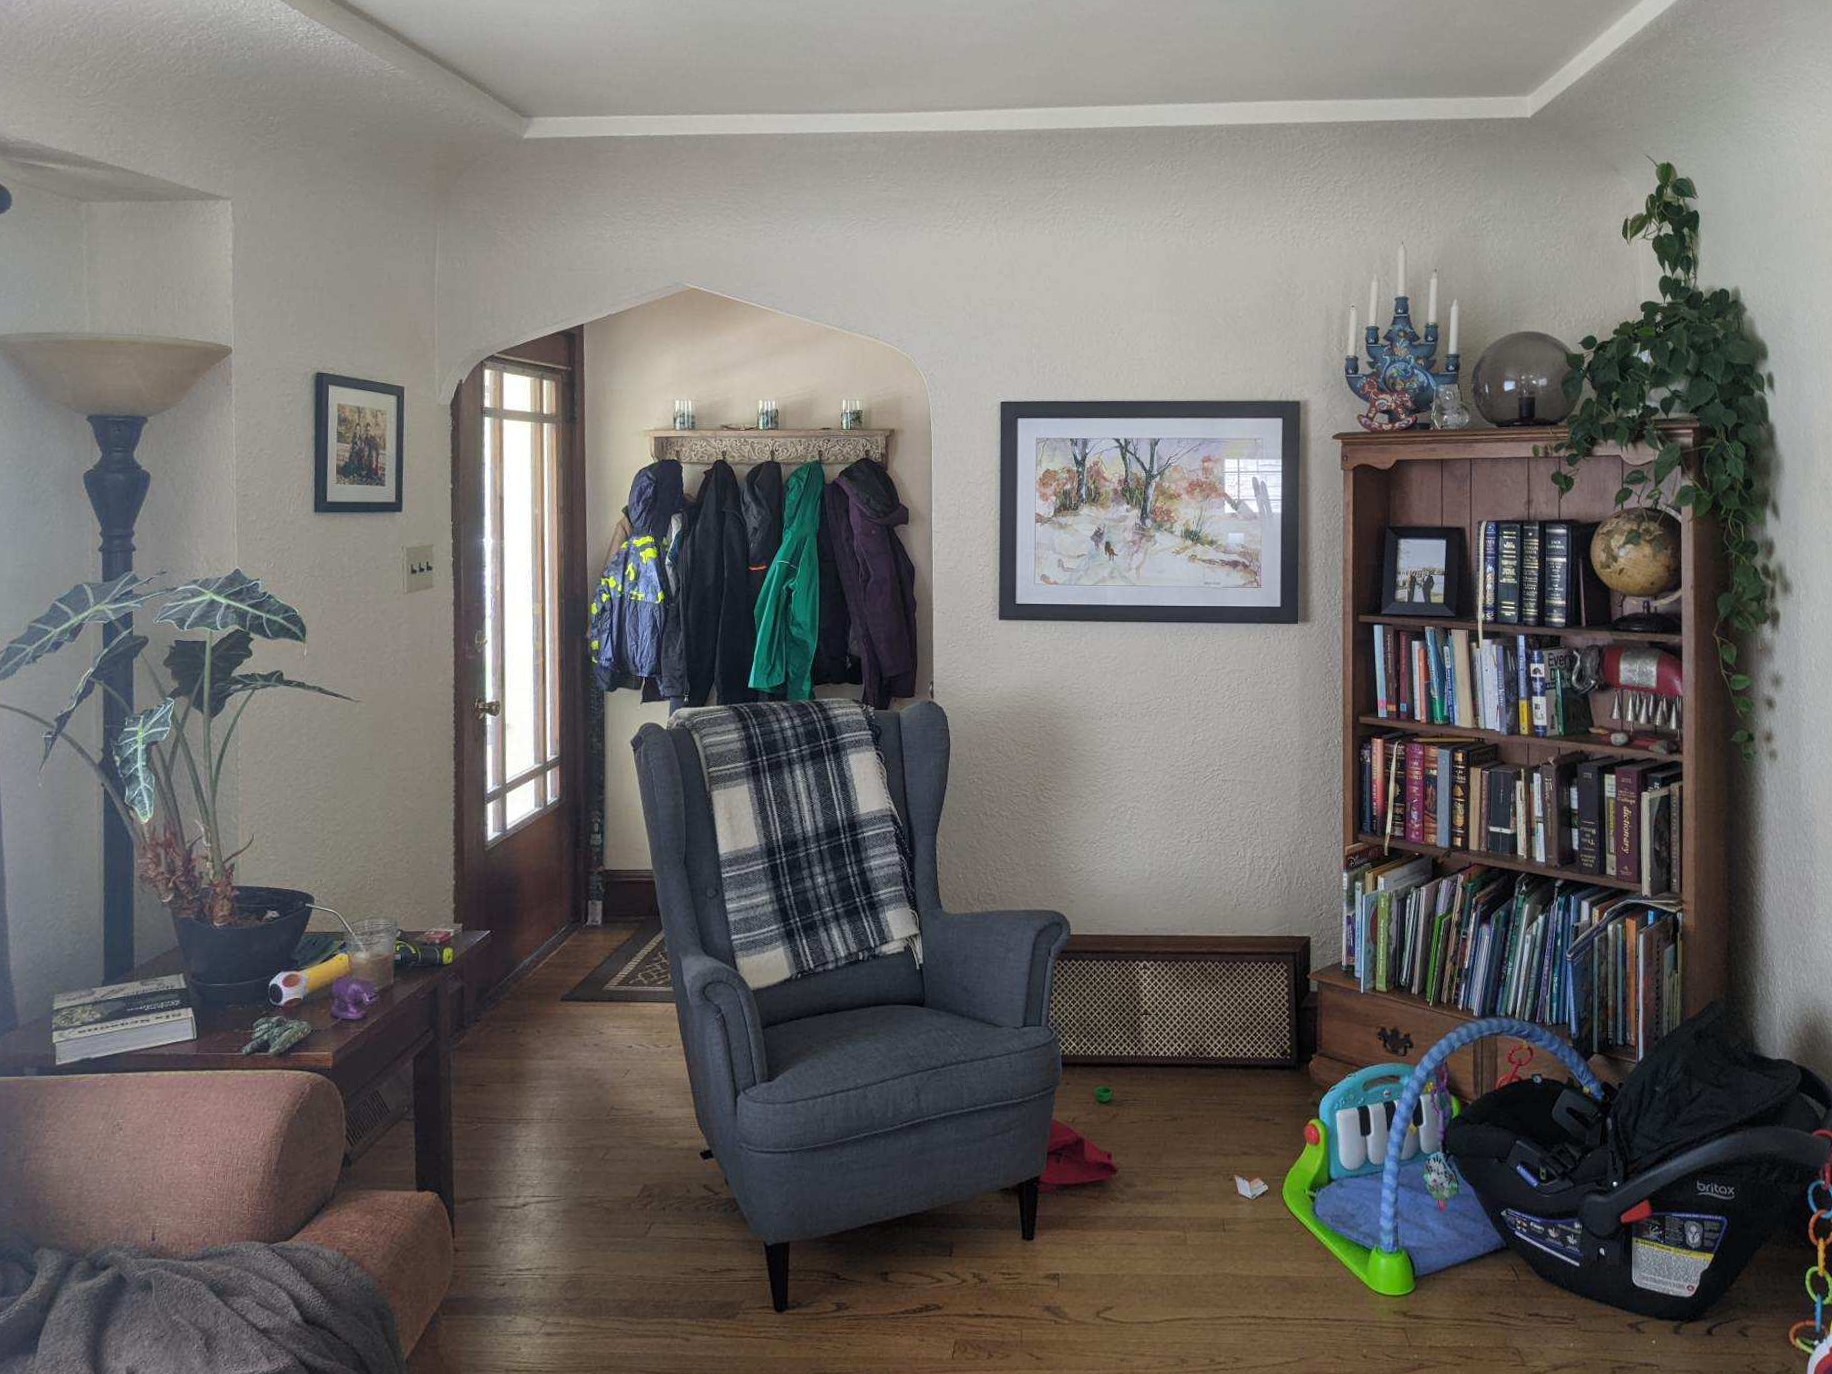 Awkward corner and cluttered entry way into living room space.